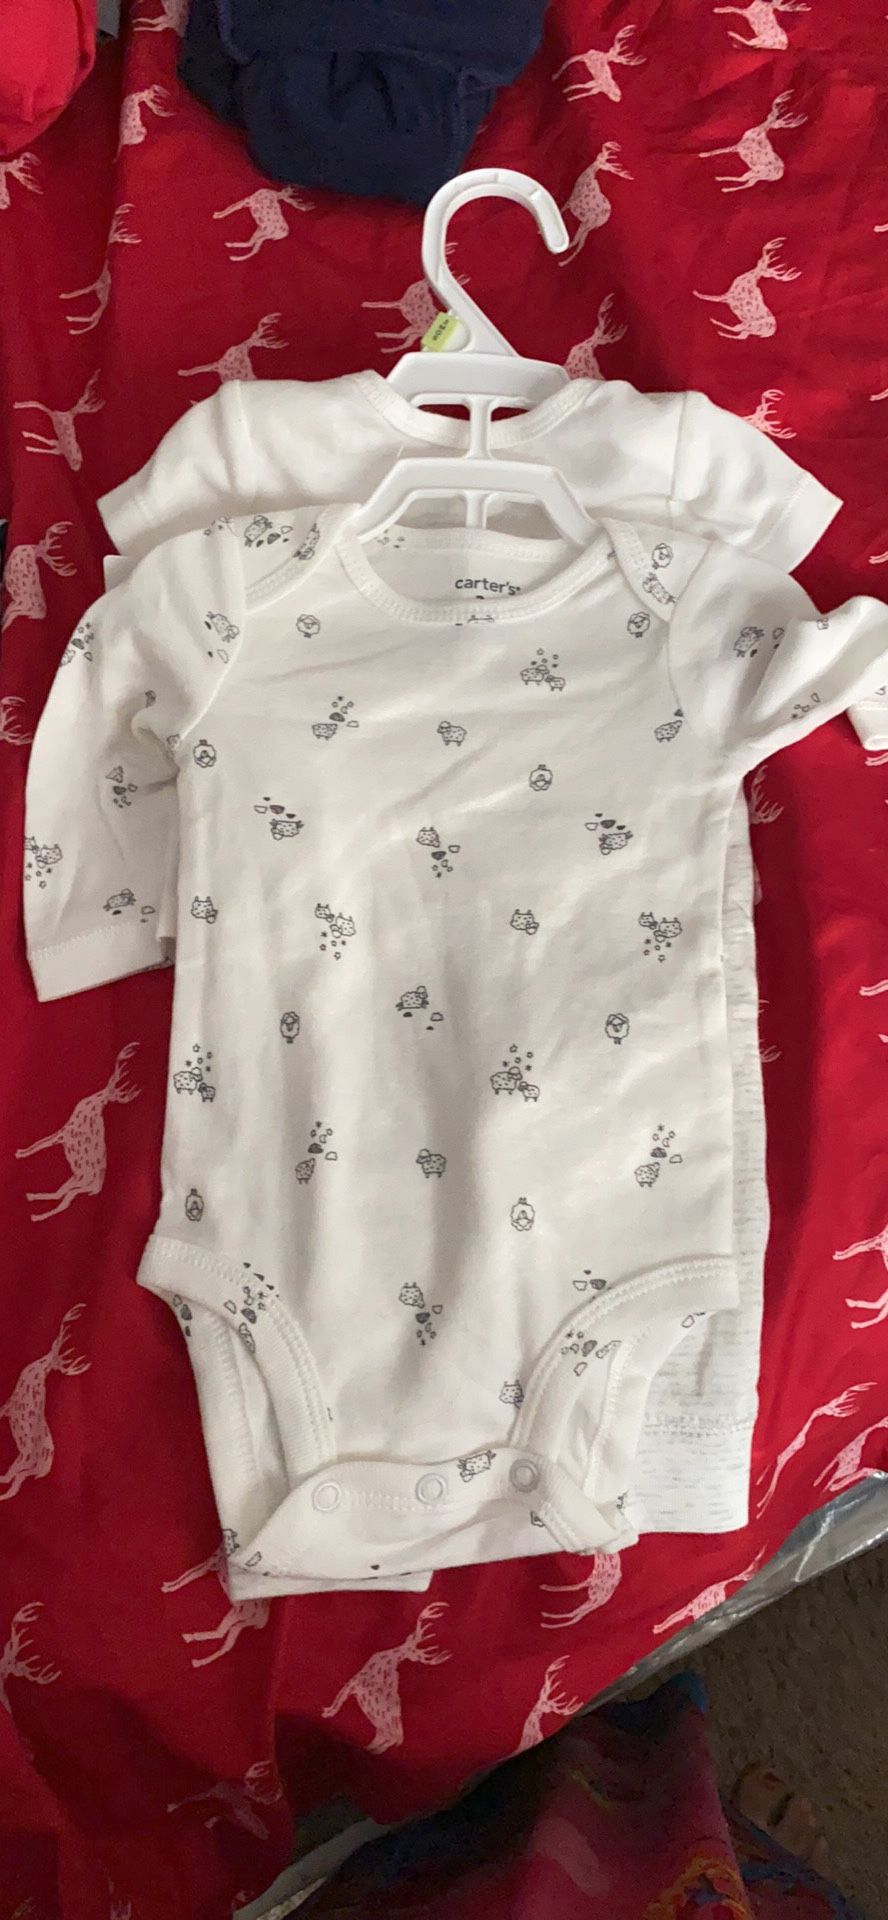 3 month old boy clothes